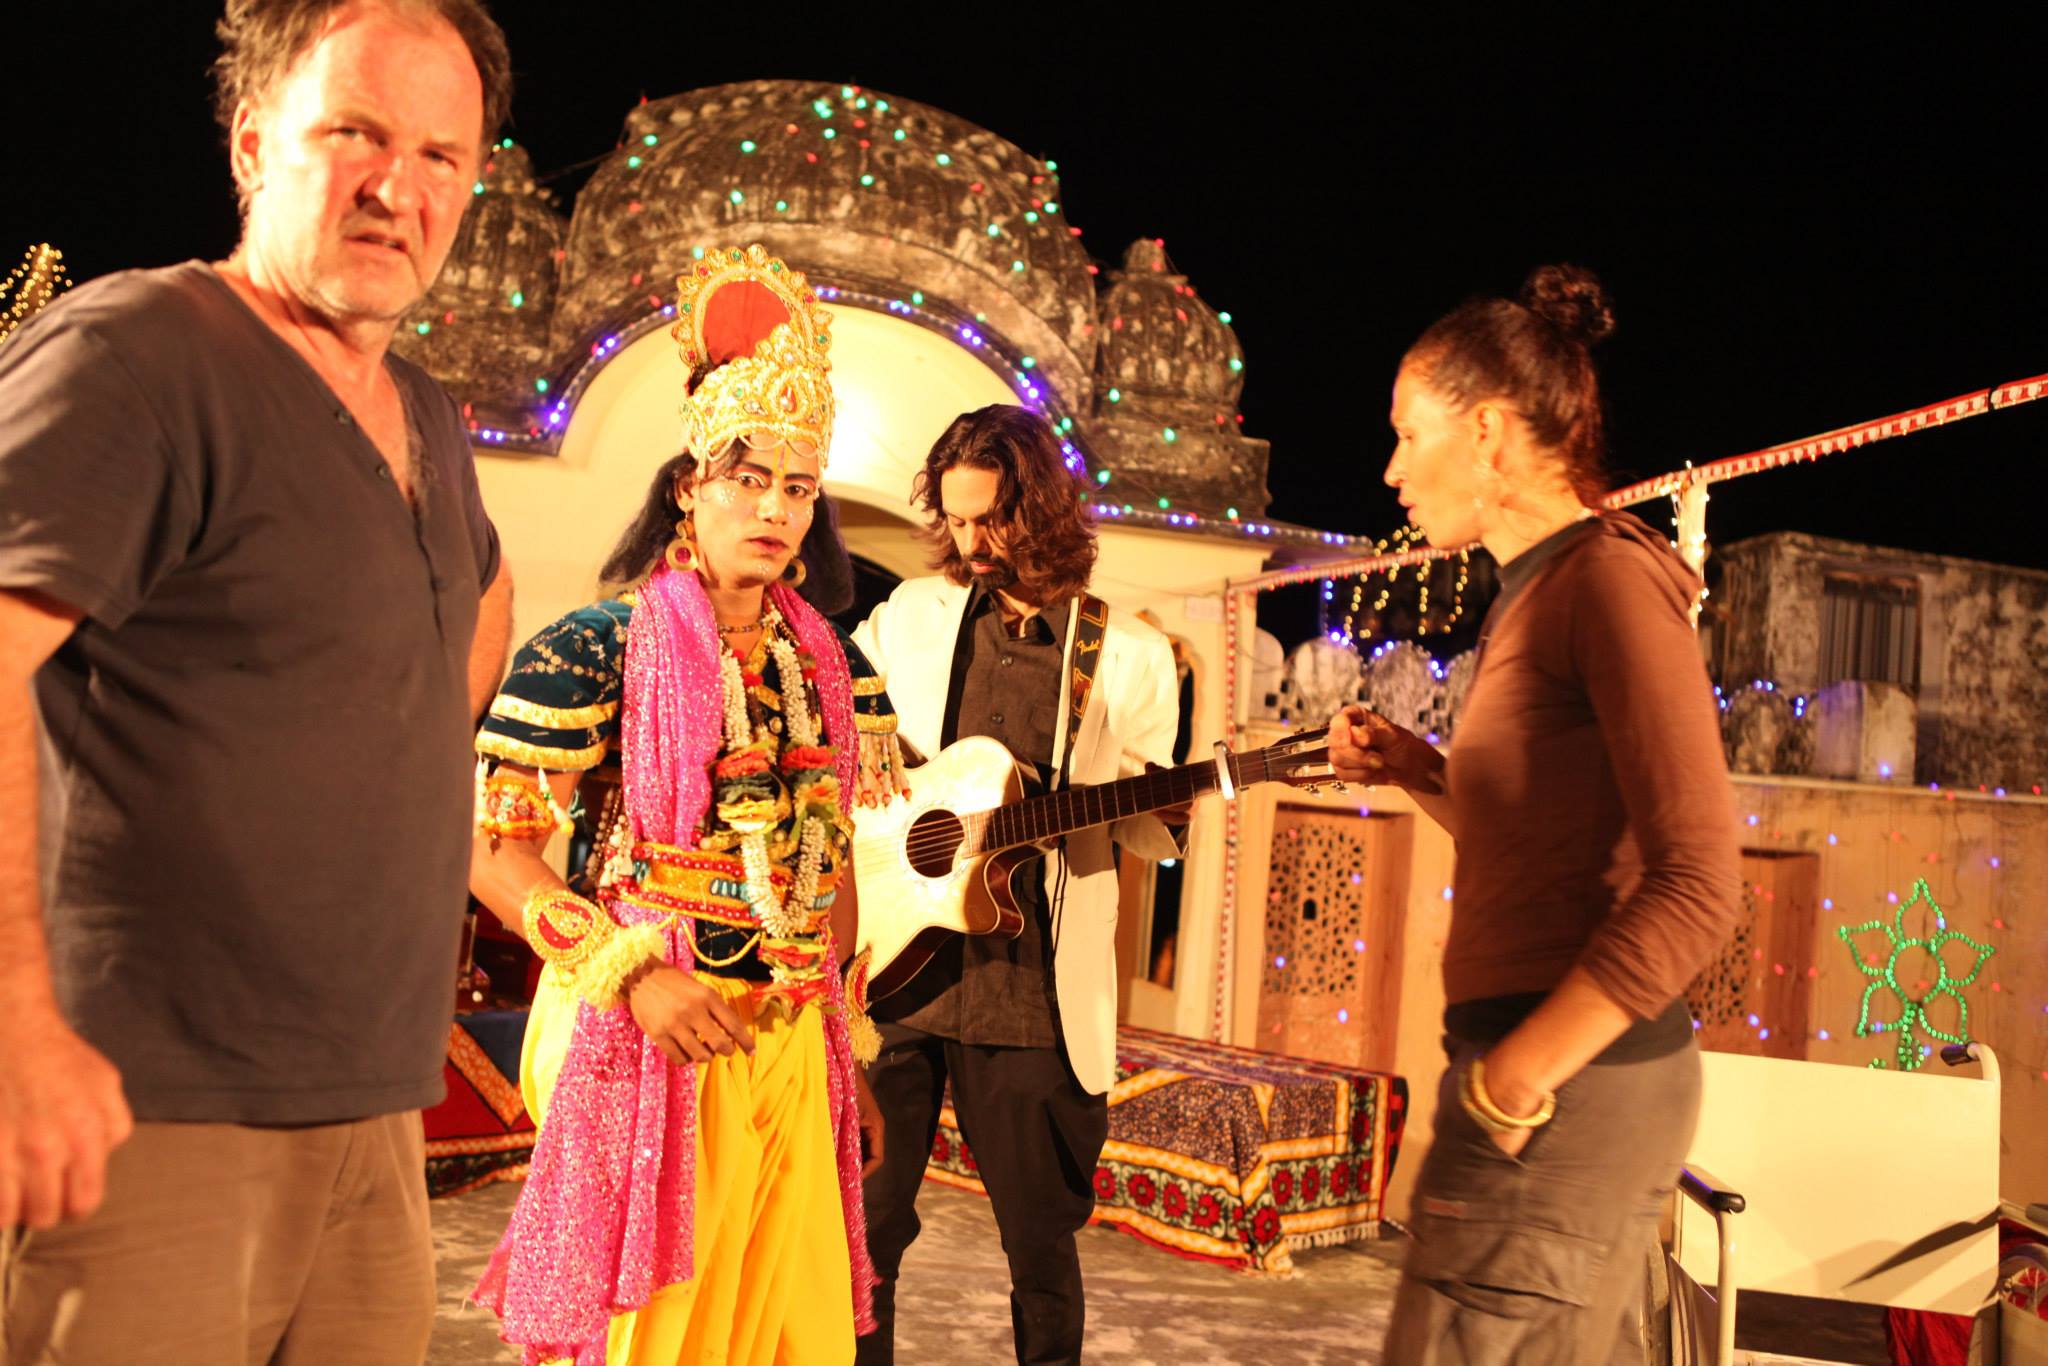 Filming a video Clip in Rajasthan (India) for the musician Shye Ben-Tzur